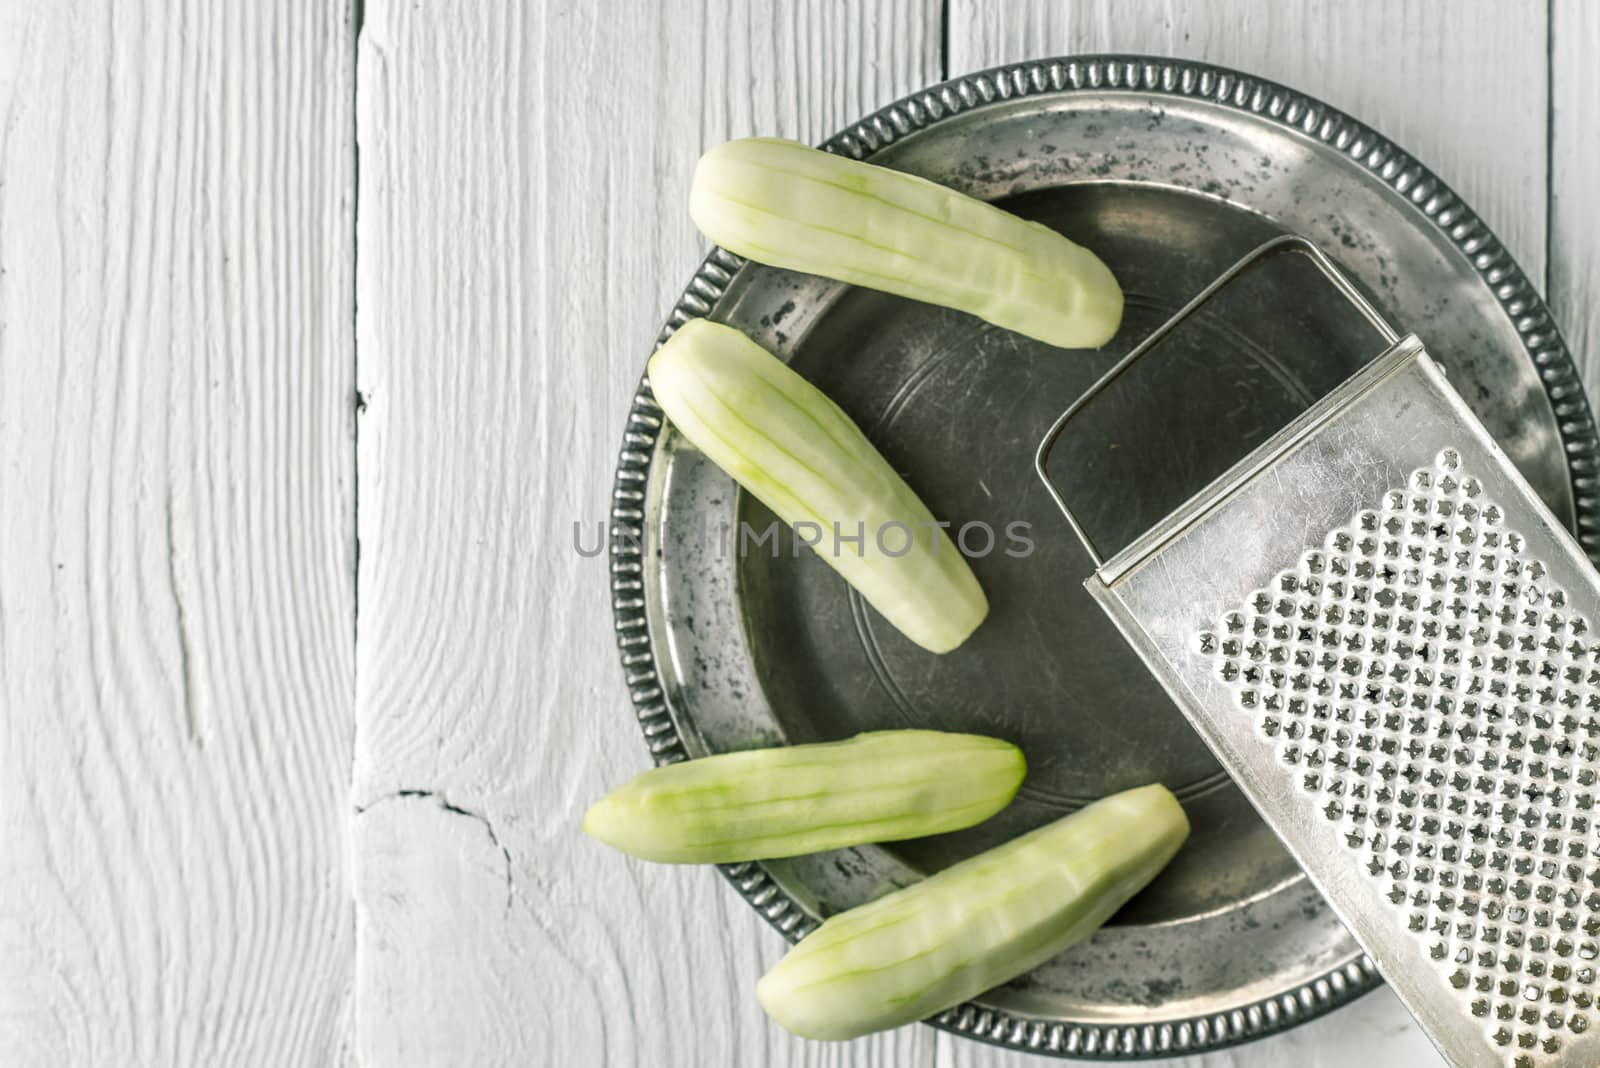 Peeled cucumbers in the metal plate with grater horizontal by Deniskarpenkov